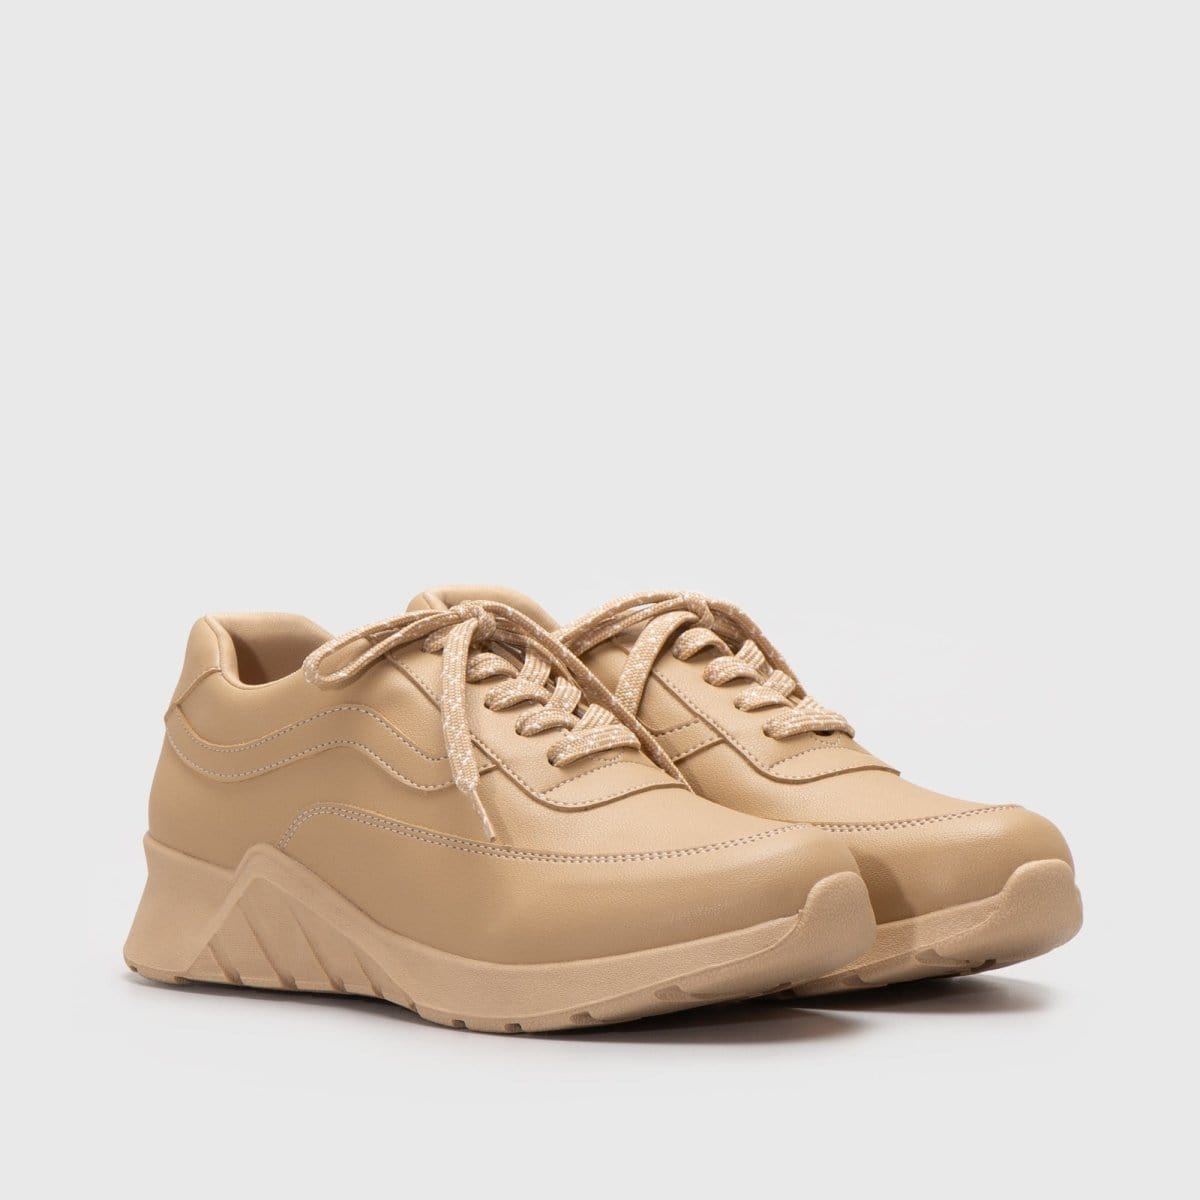 Adorable Projects Official Sneakers 35 / Nude Kikimora Sneakers Nude